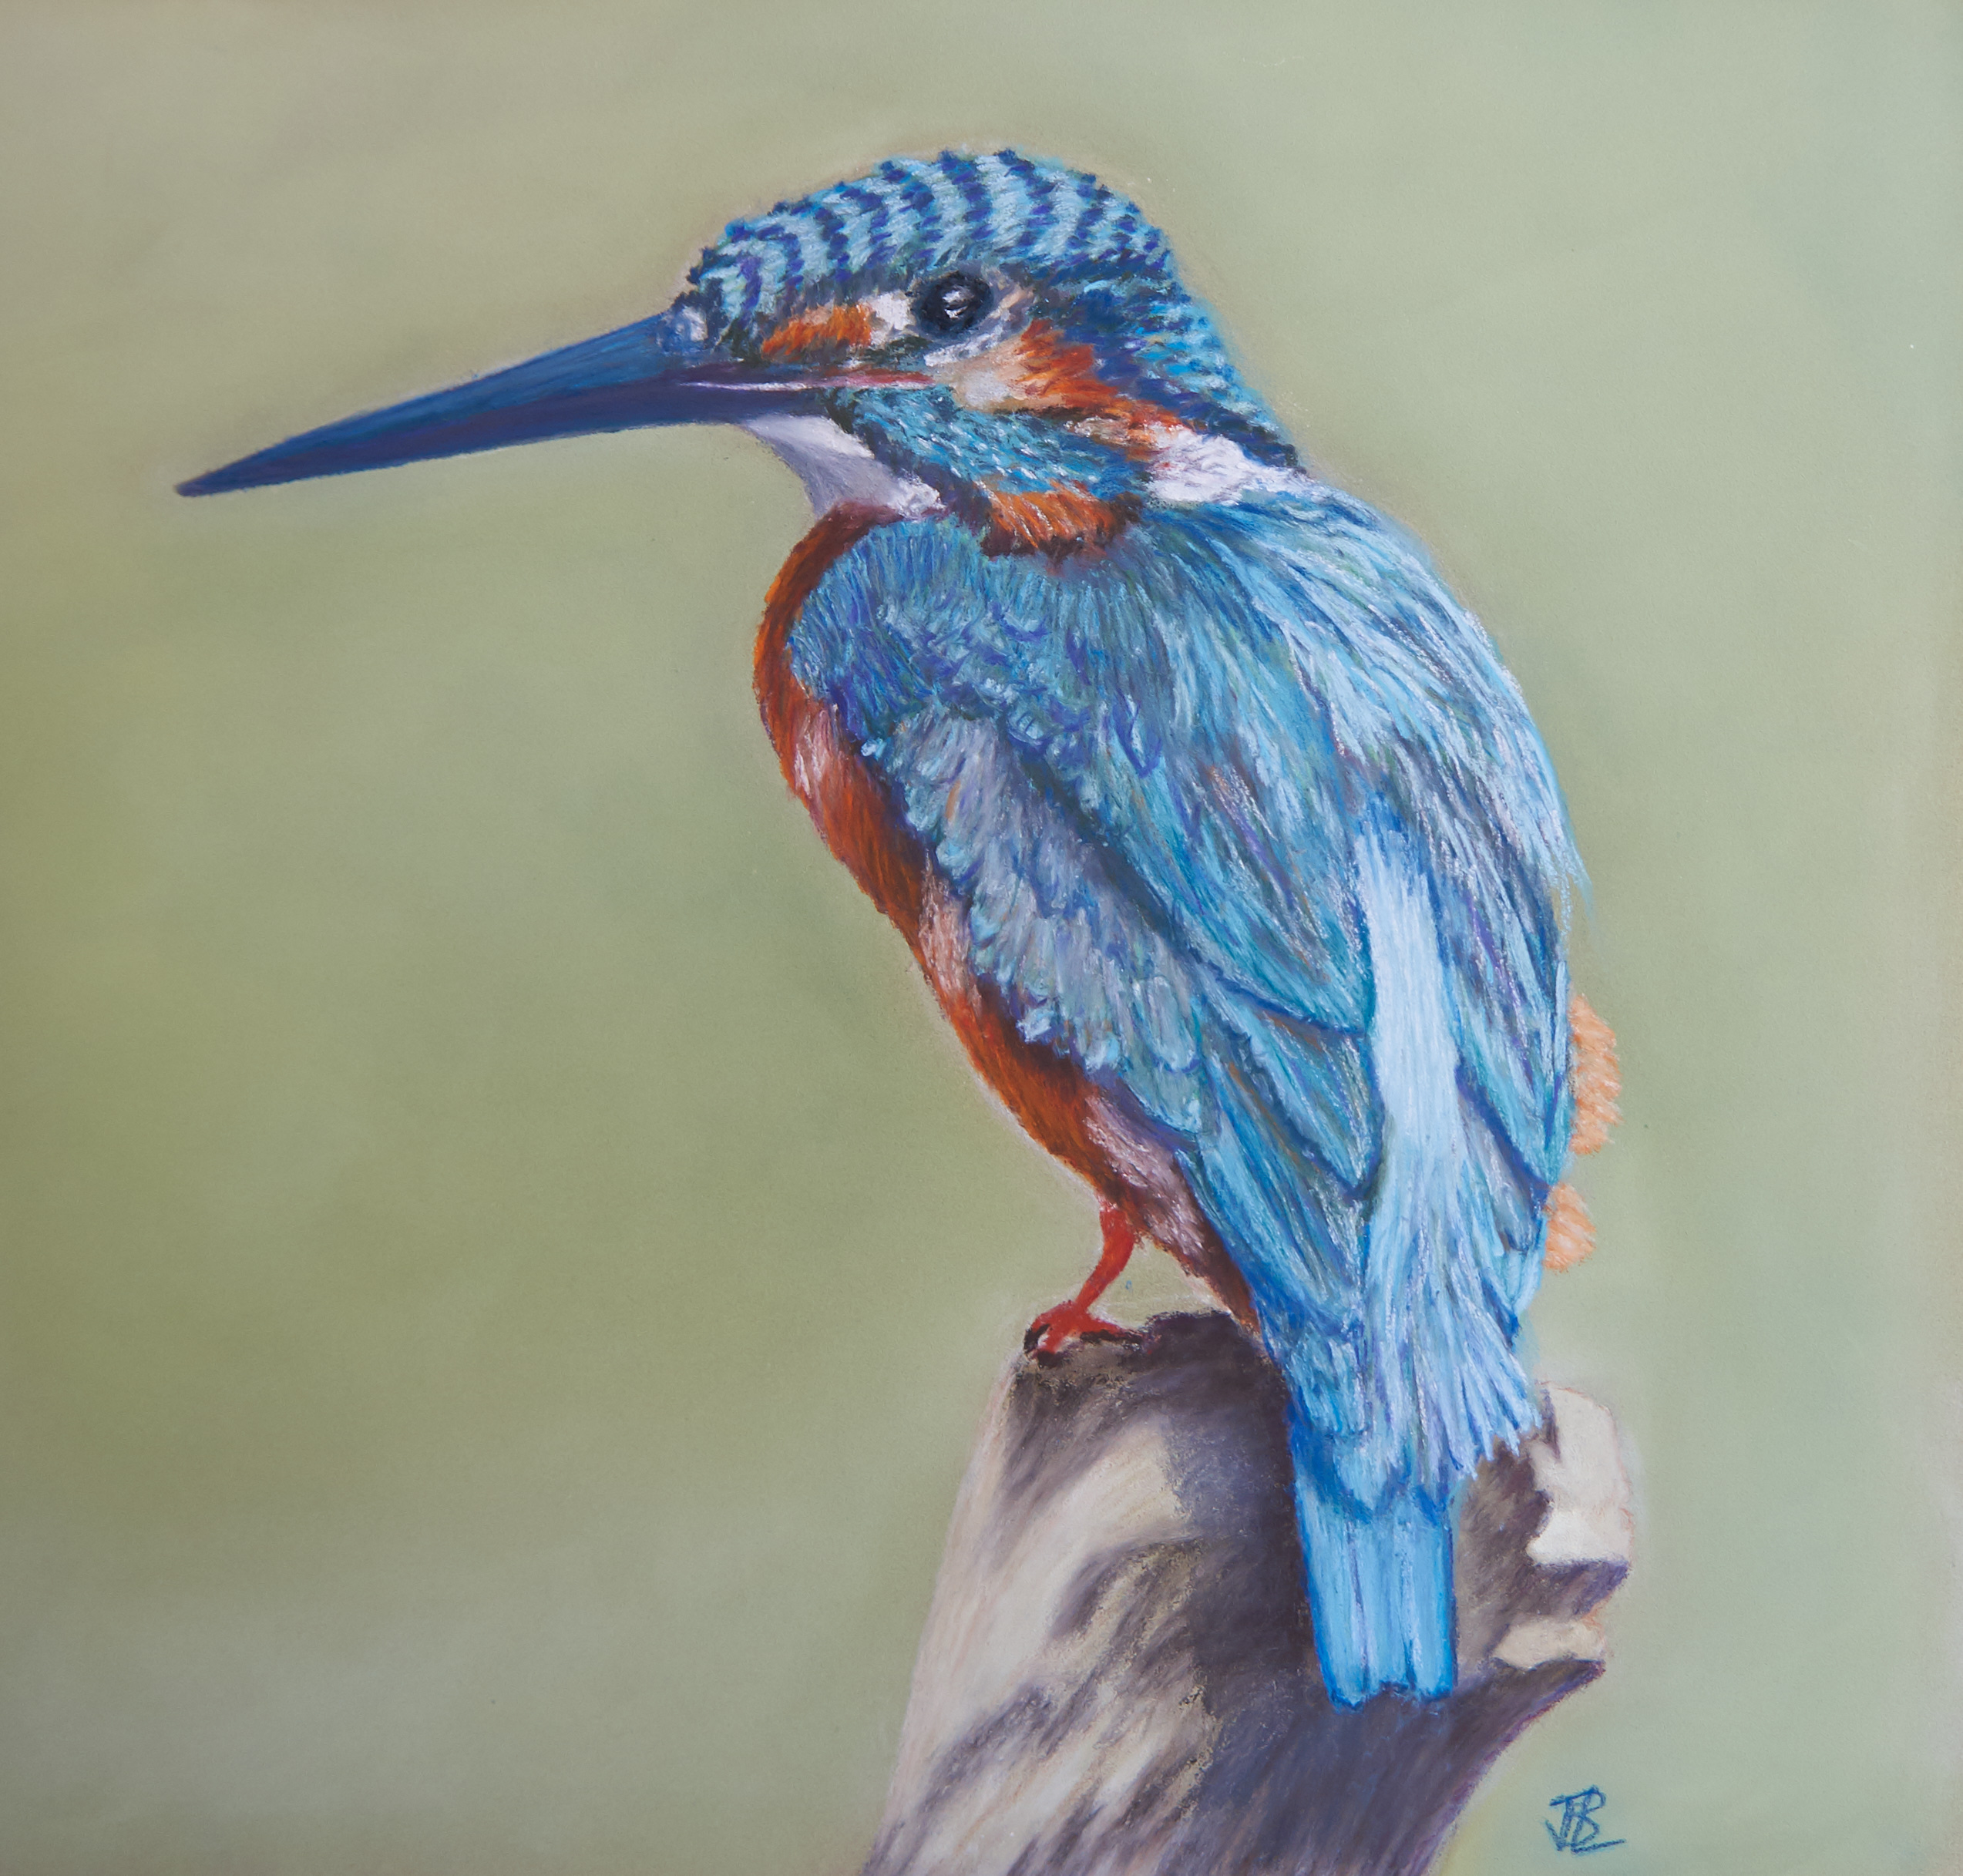 Kingfisher : Drawing with Mungyo Gallery Oil Pastel for the First Time  -STEP by STEP 